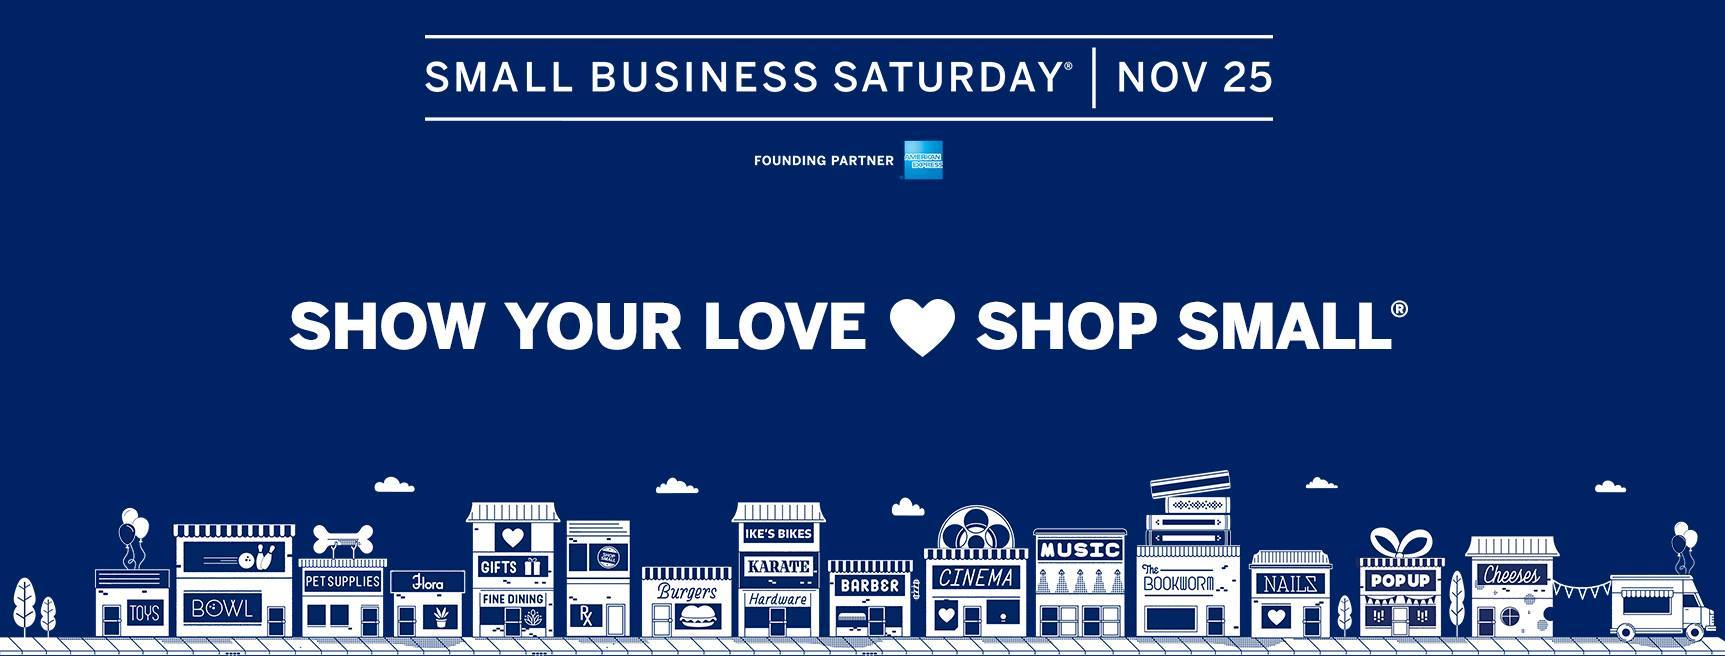 Small Business Saturday – Nov. 25 in downtown Athens